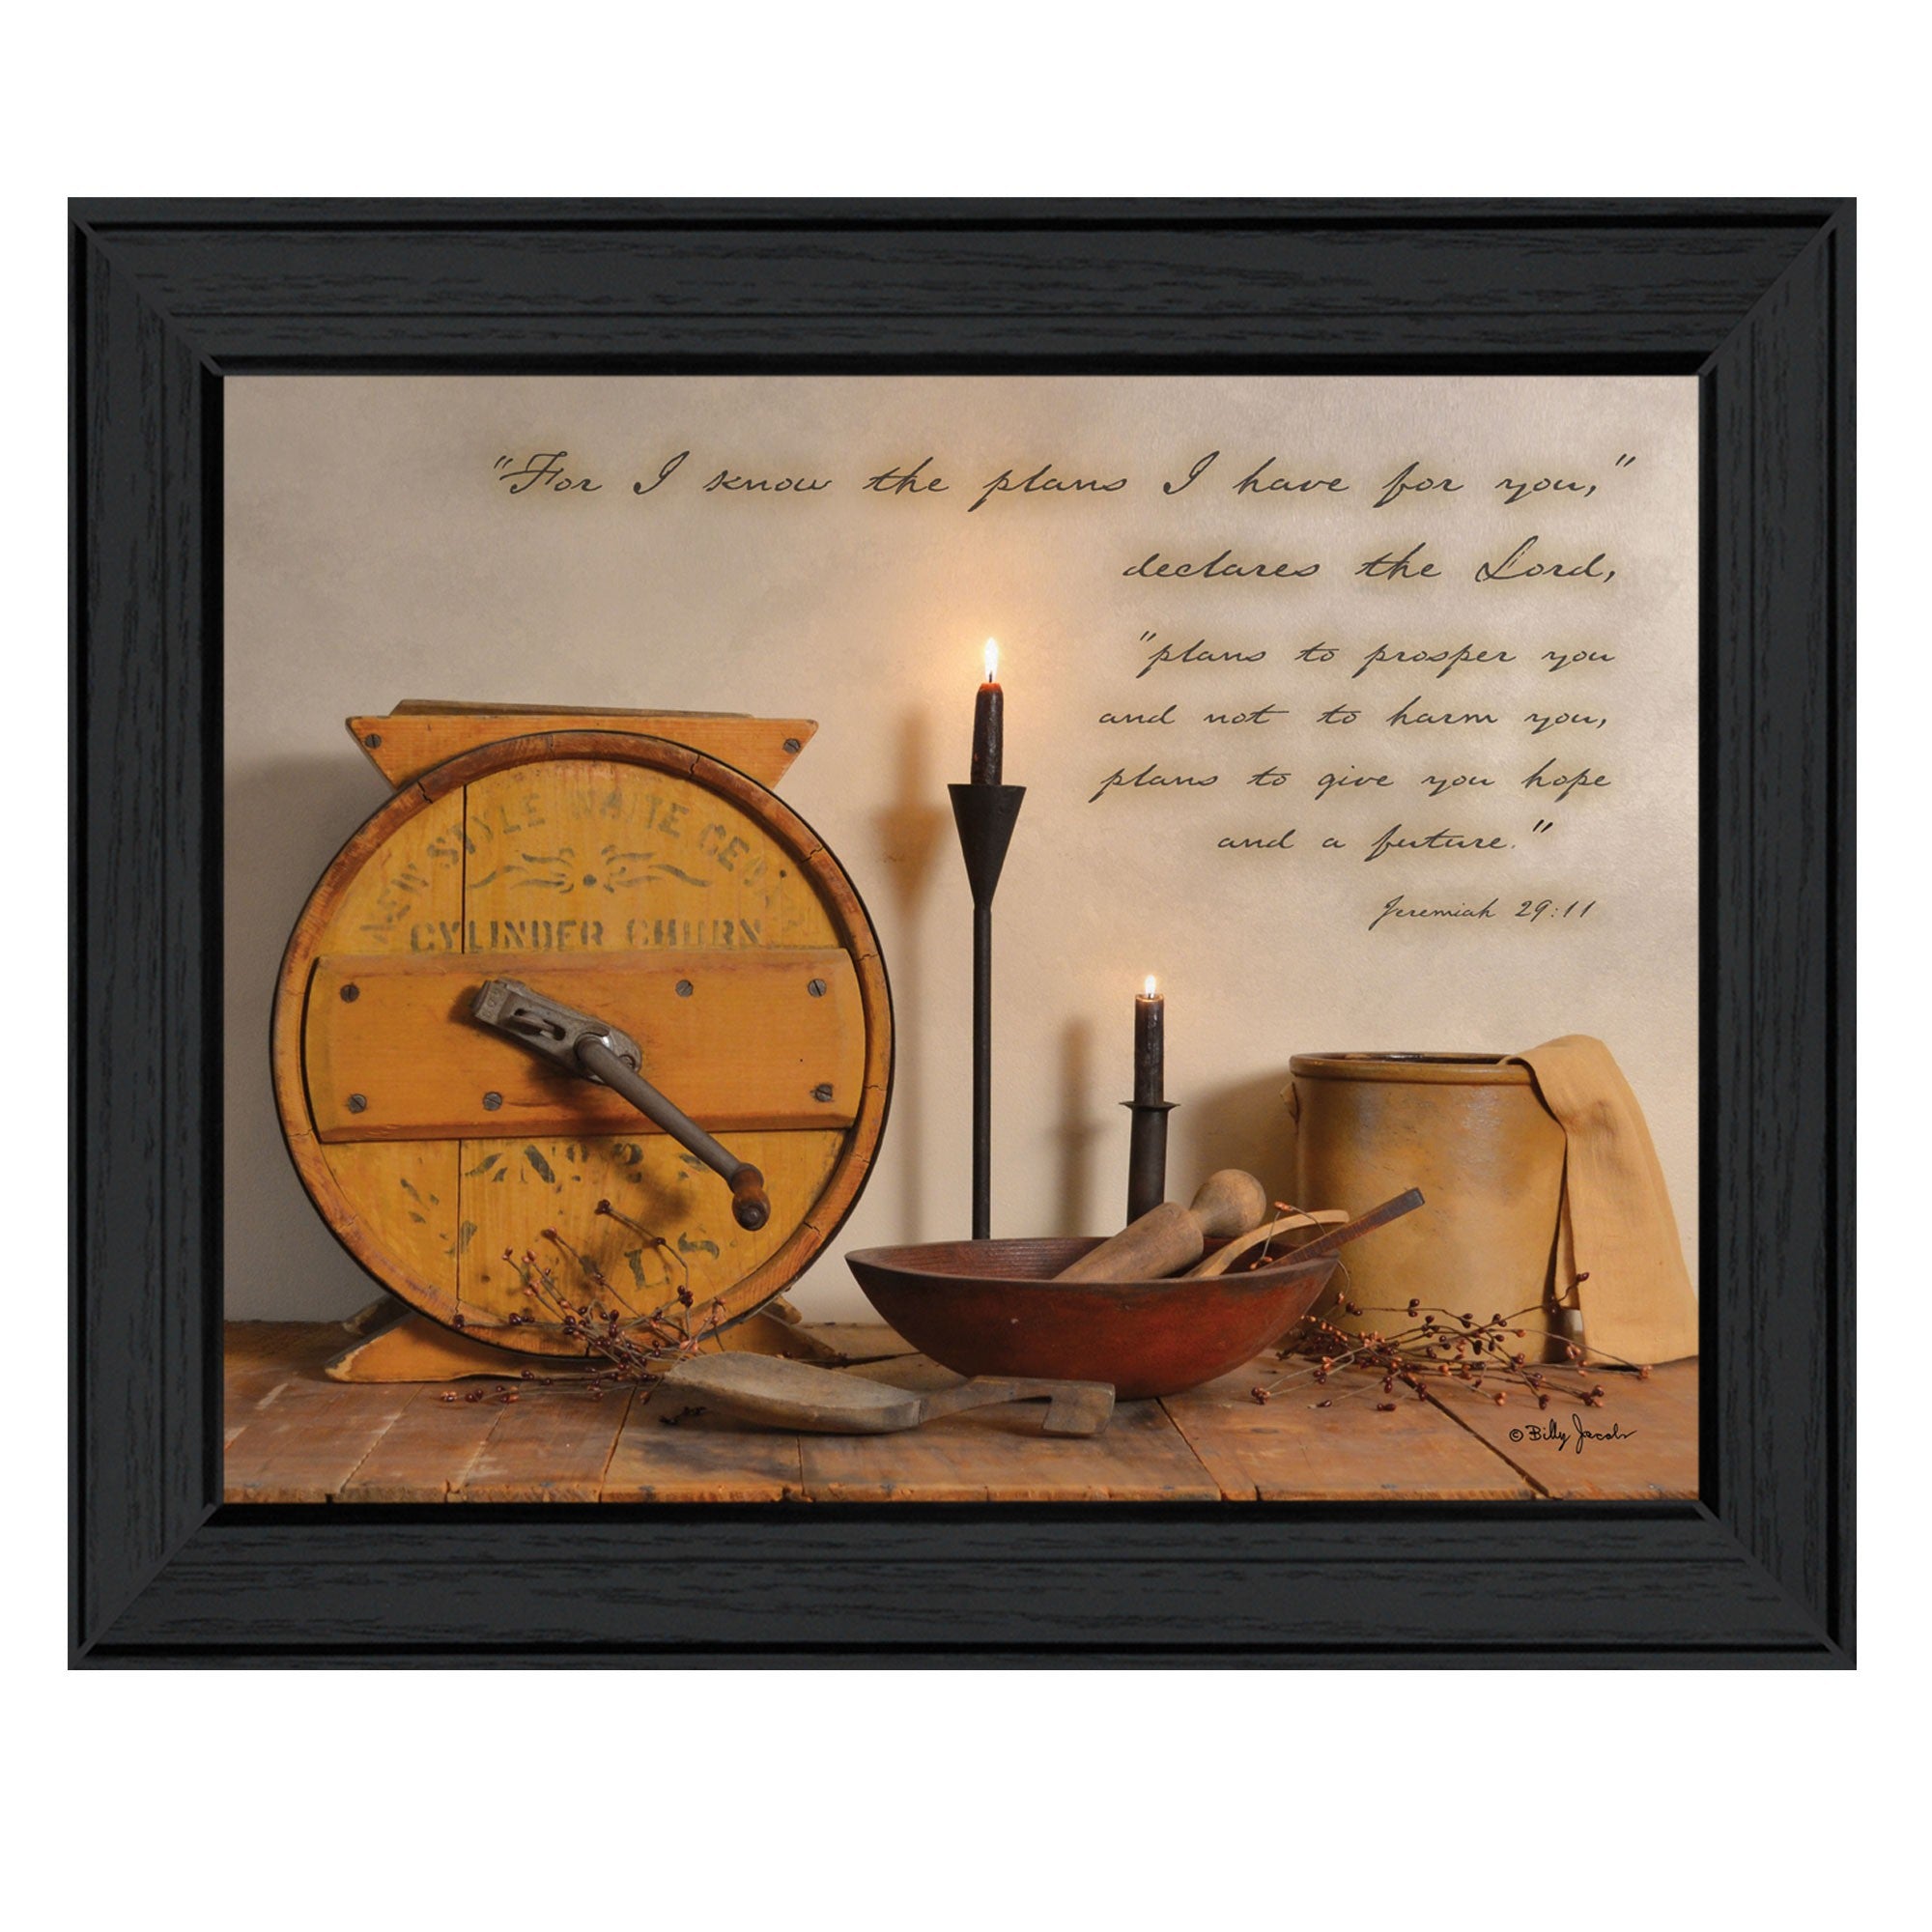 The Plans I have for You 2 Black Framed Print Wall Art